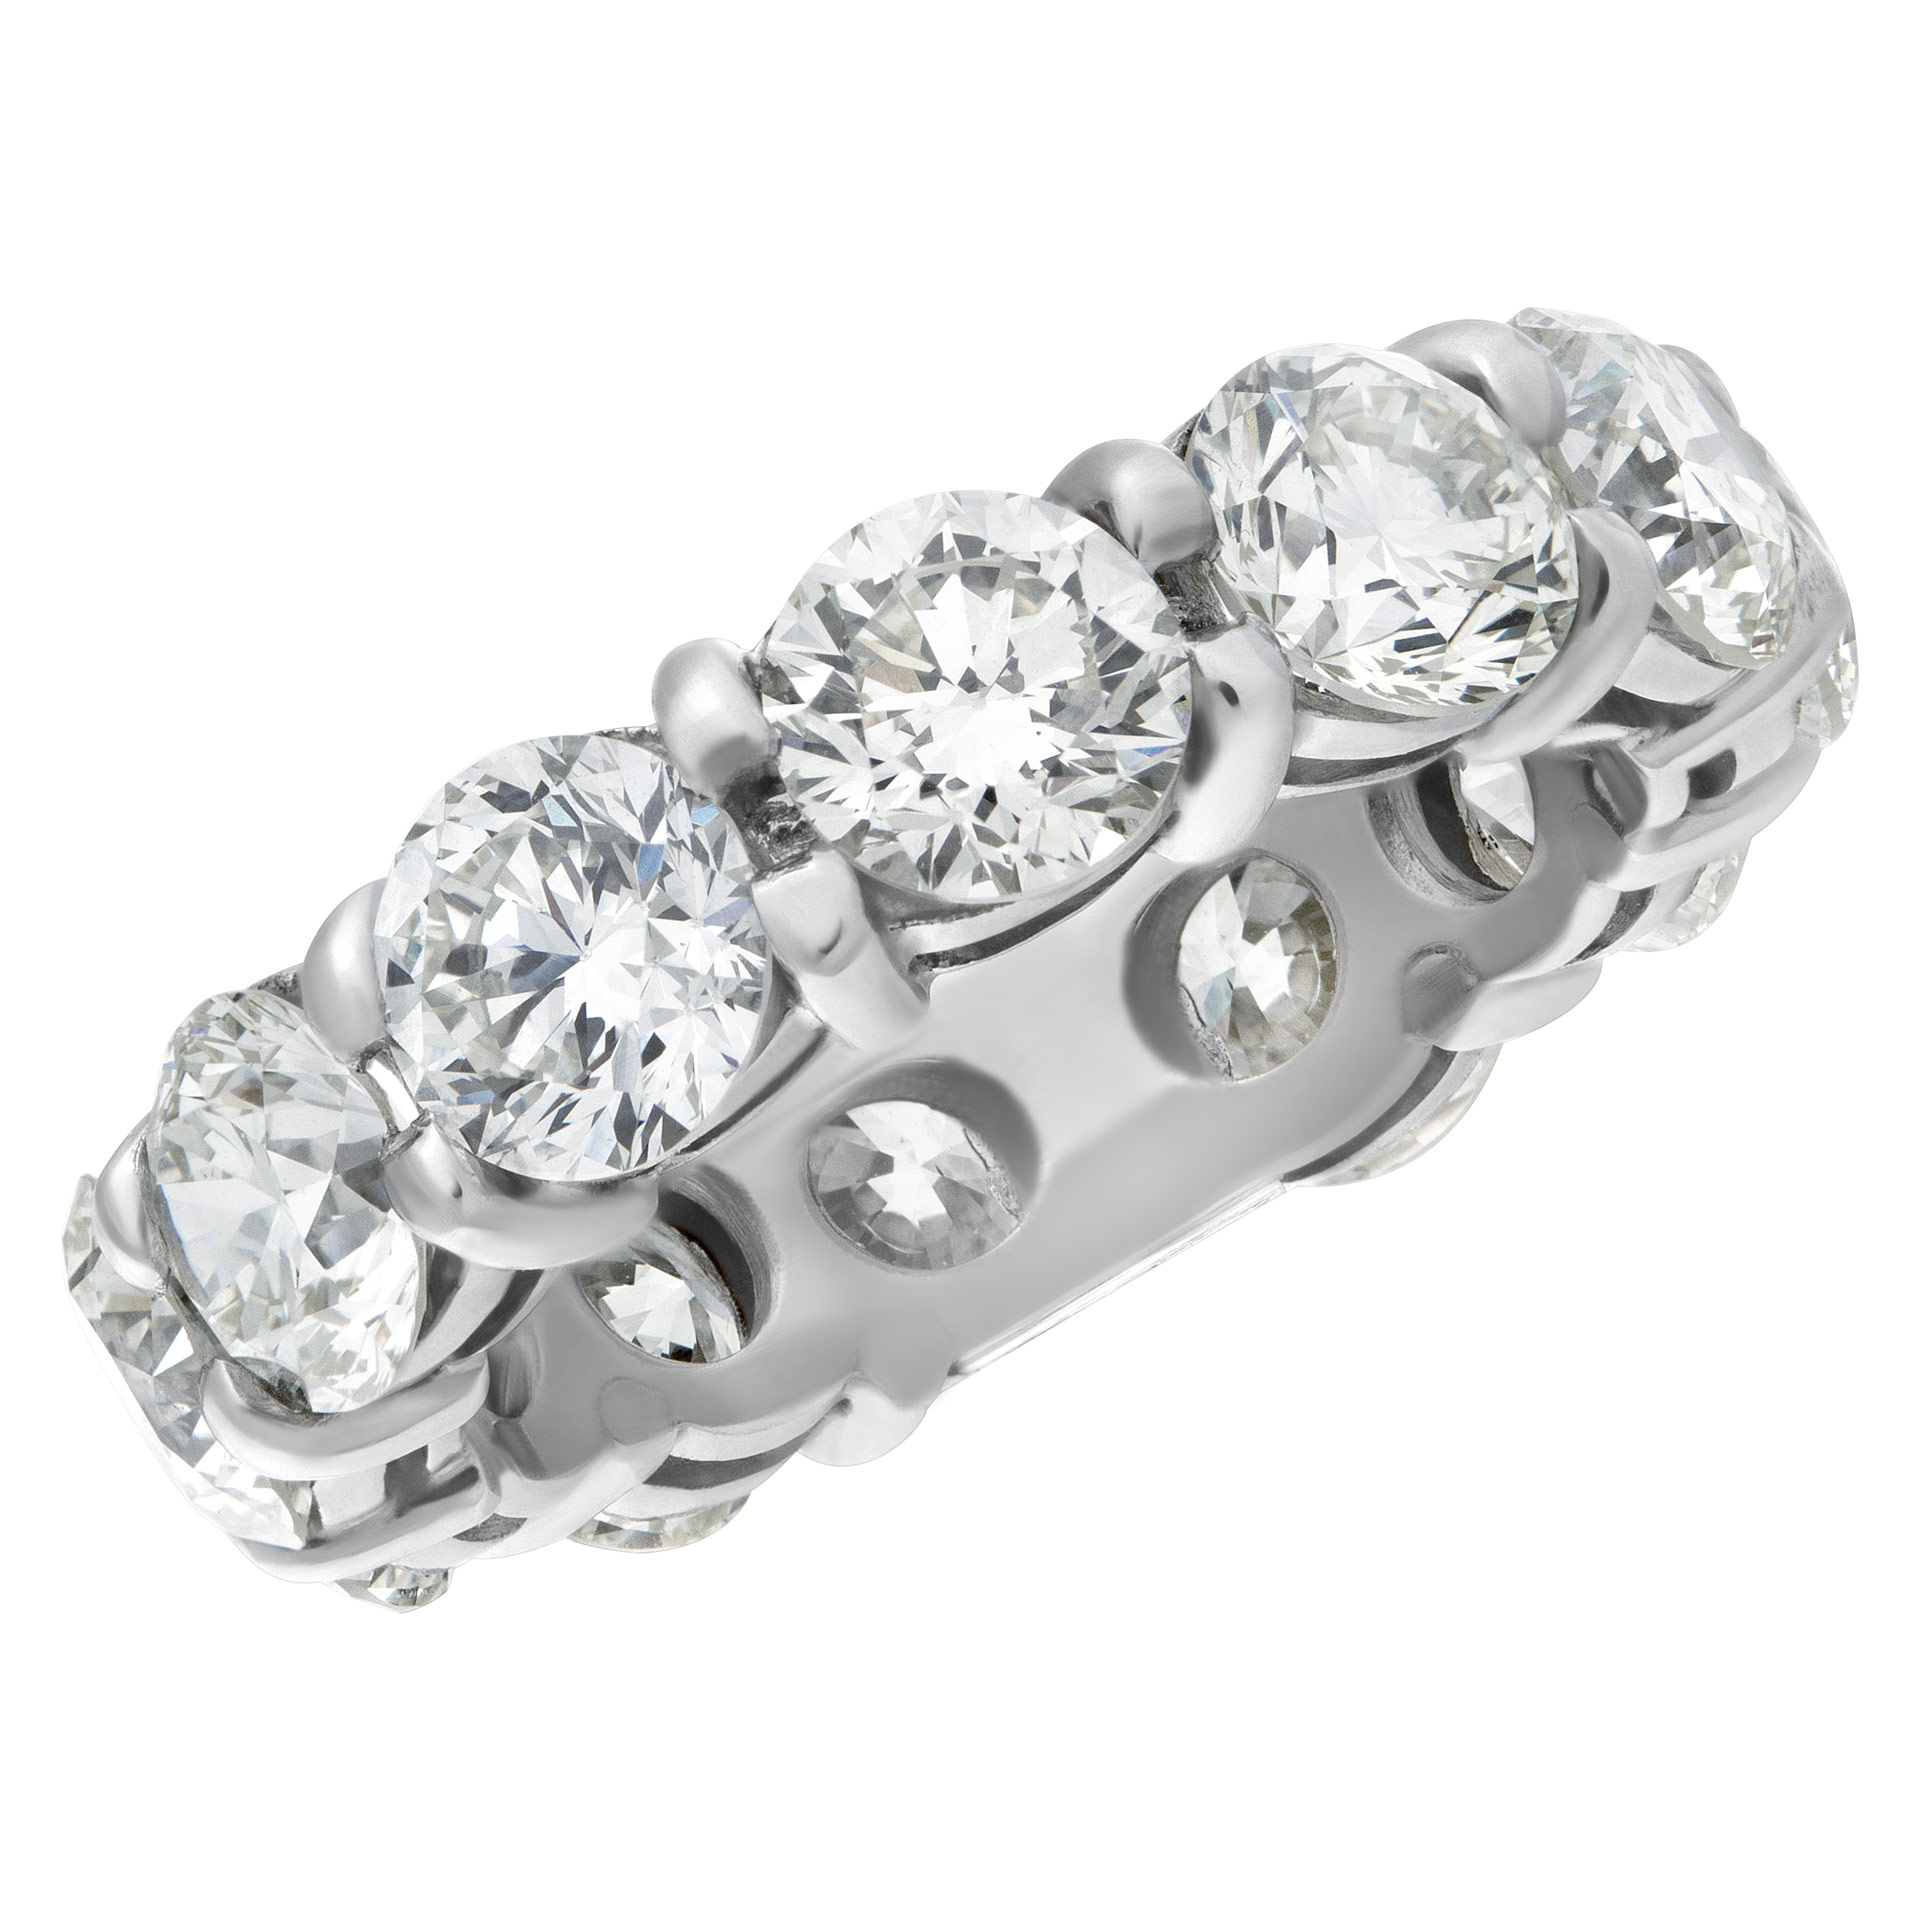 Diamond Eternity Band and Ring platinum custom made with approximately 8.50 carats in diamonds (K-M color, VS-SI Clarity) image 3